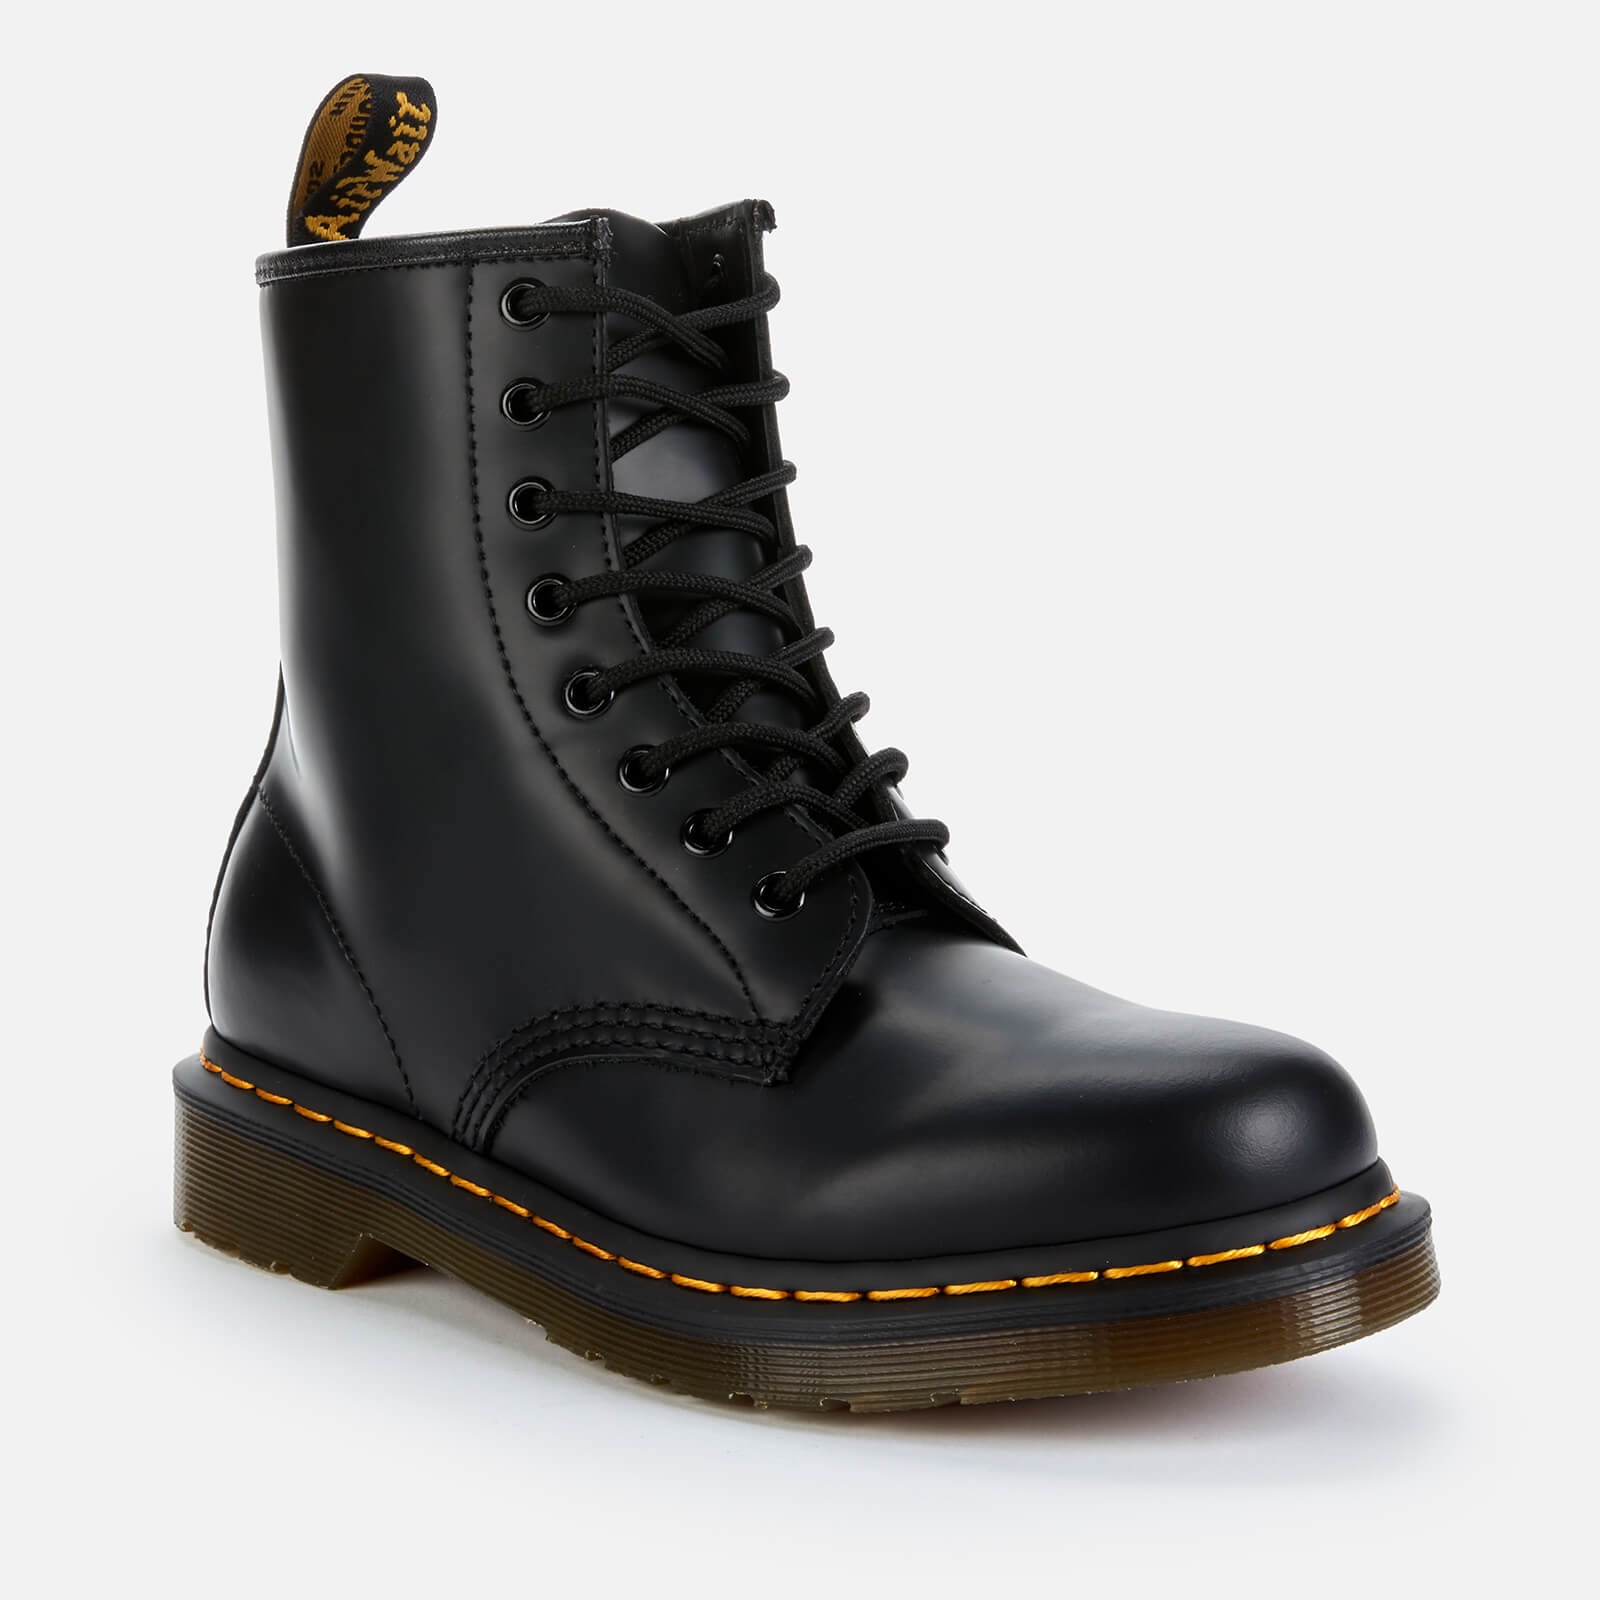 Dr. Martens 1460 Smooth Leather 8-Eye Boots - Black - 2